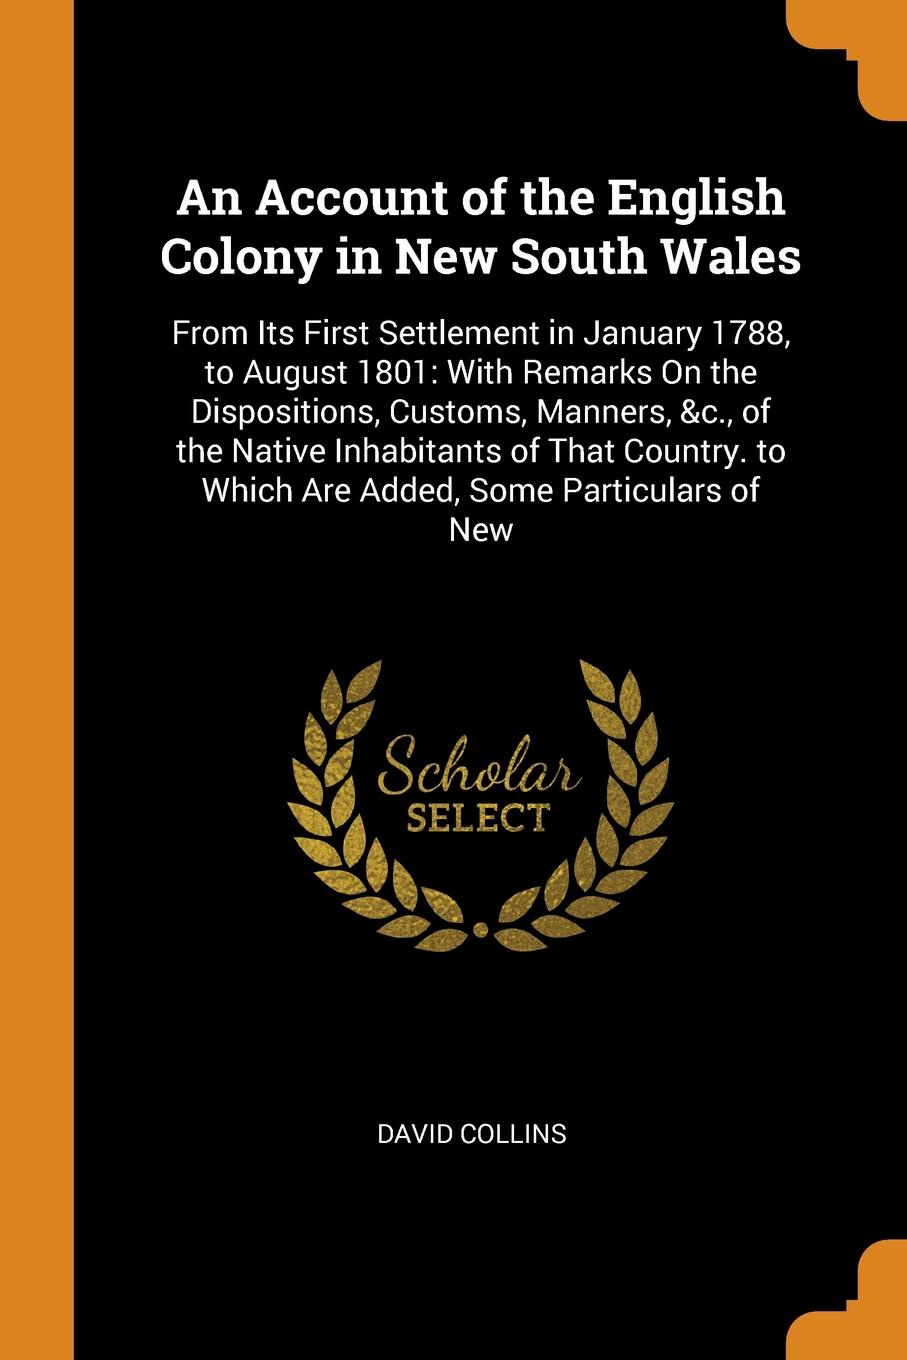 An Account of the English Colony in New South Wales. From Its First Settlement in January 1788, to August 1801: With Remarks On the Dispositions, Customs, Manners, &c., of the Native Inhabitants of That Country. to Which Are Added, Some Particular...